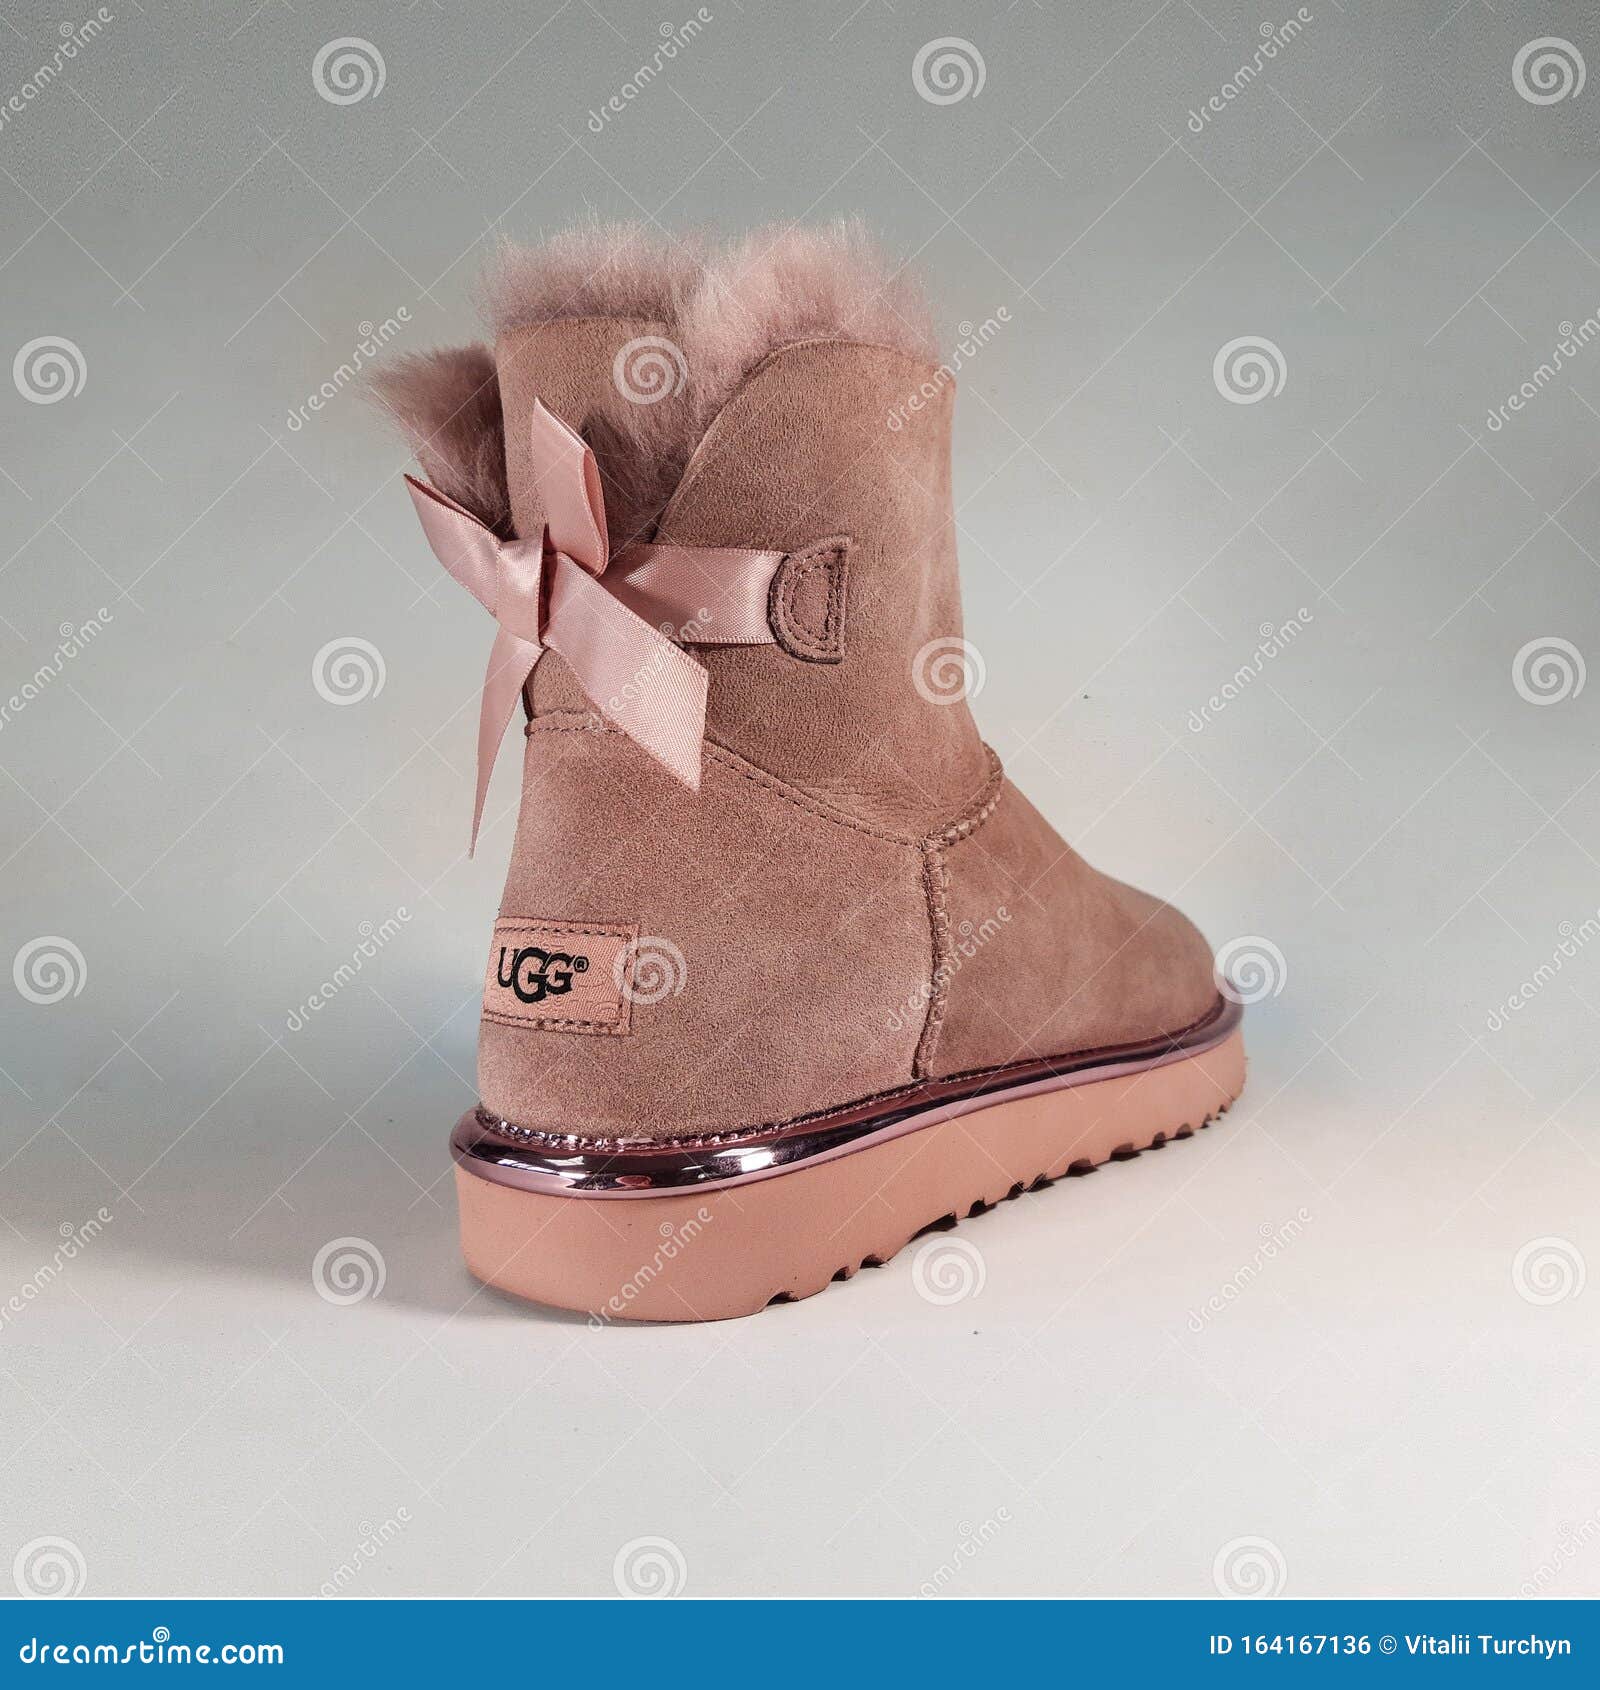 ugg shoes with fur